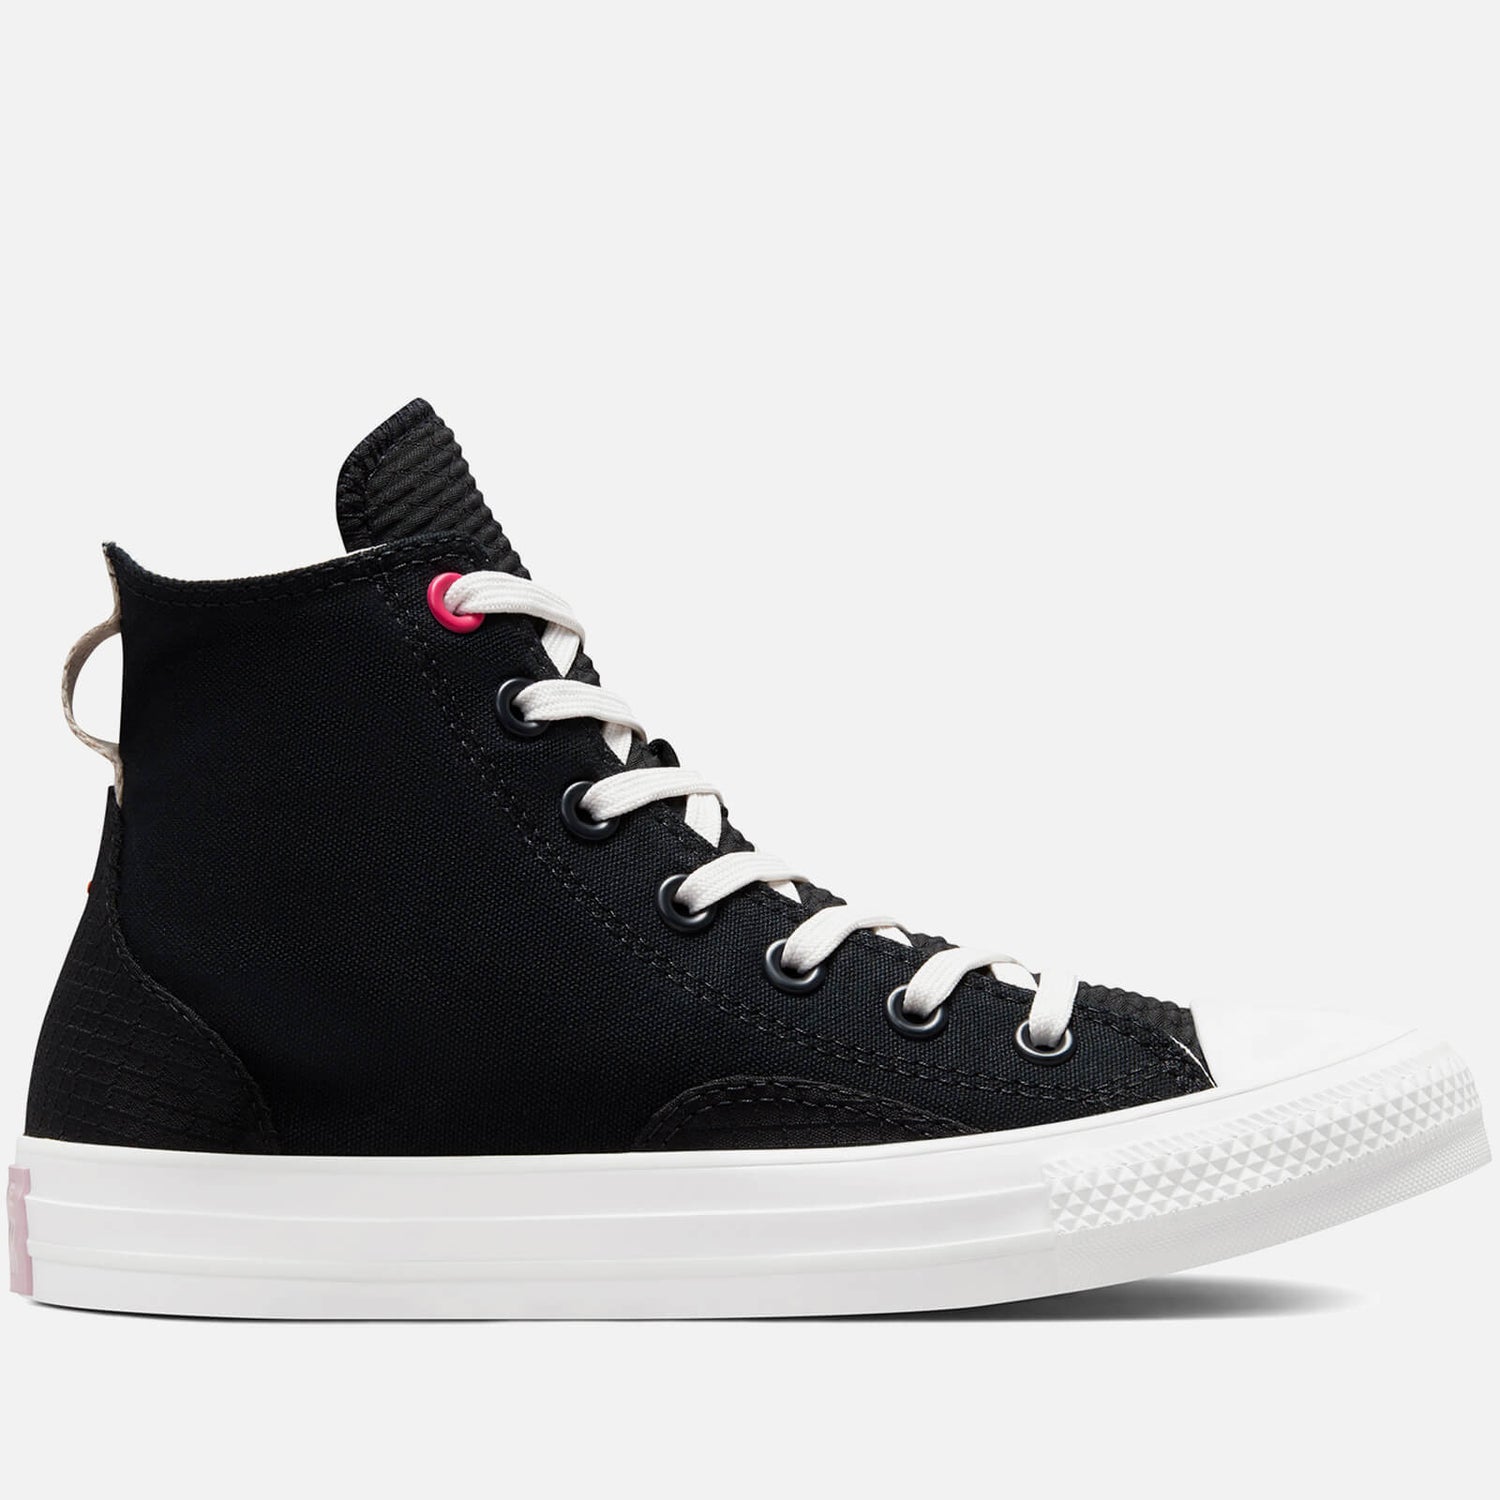 Converse Women's Chuck Taylor All Star Future Utility Hi-Top Trainers - Black/Almost Black/Vintage White